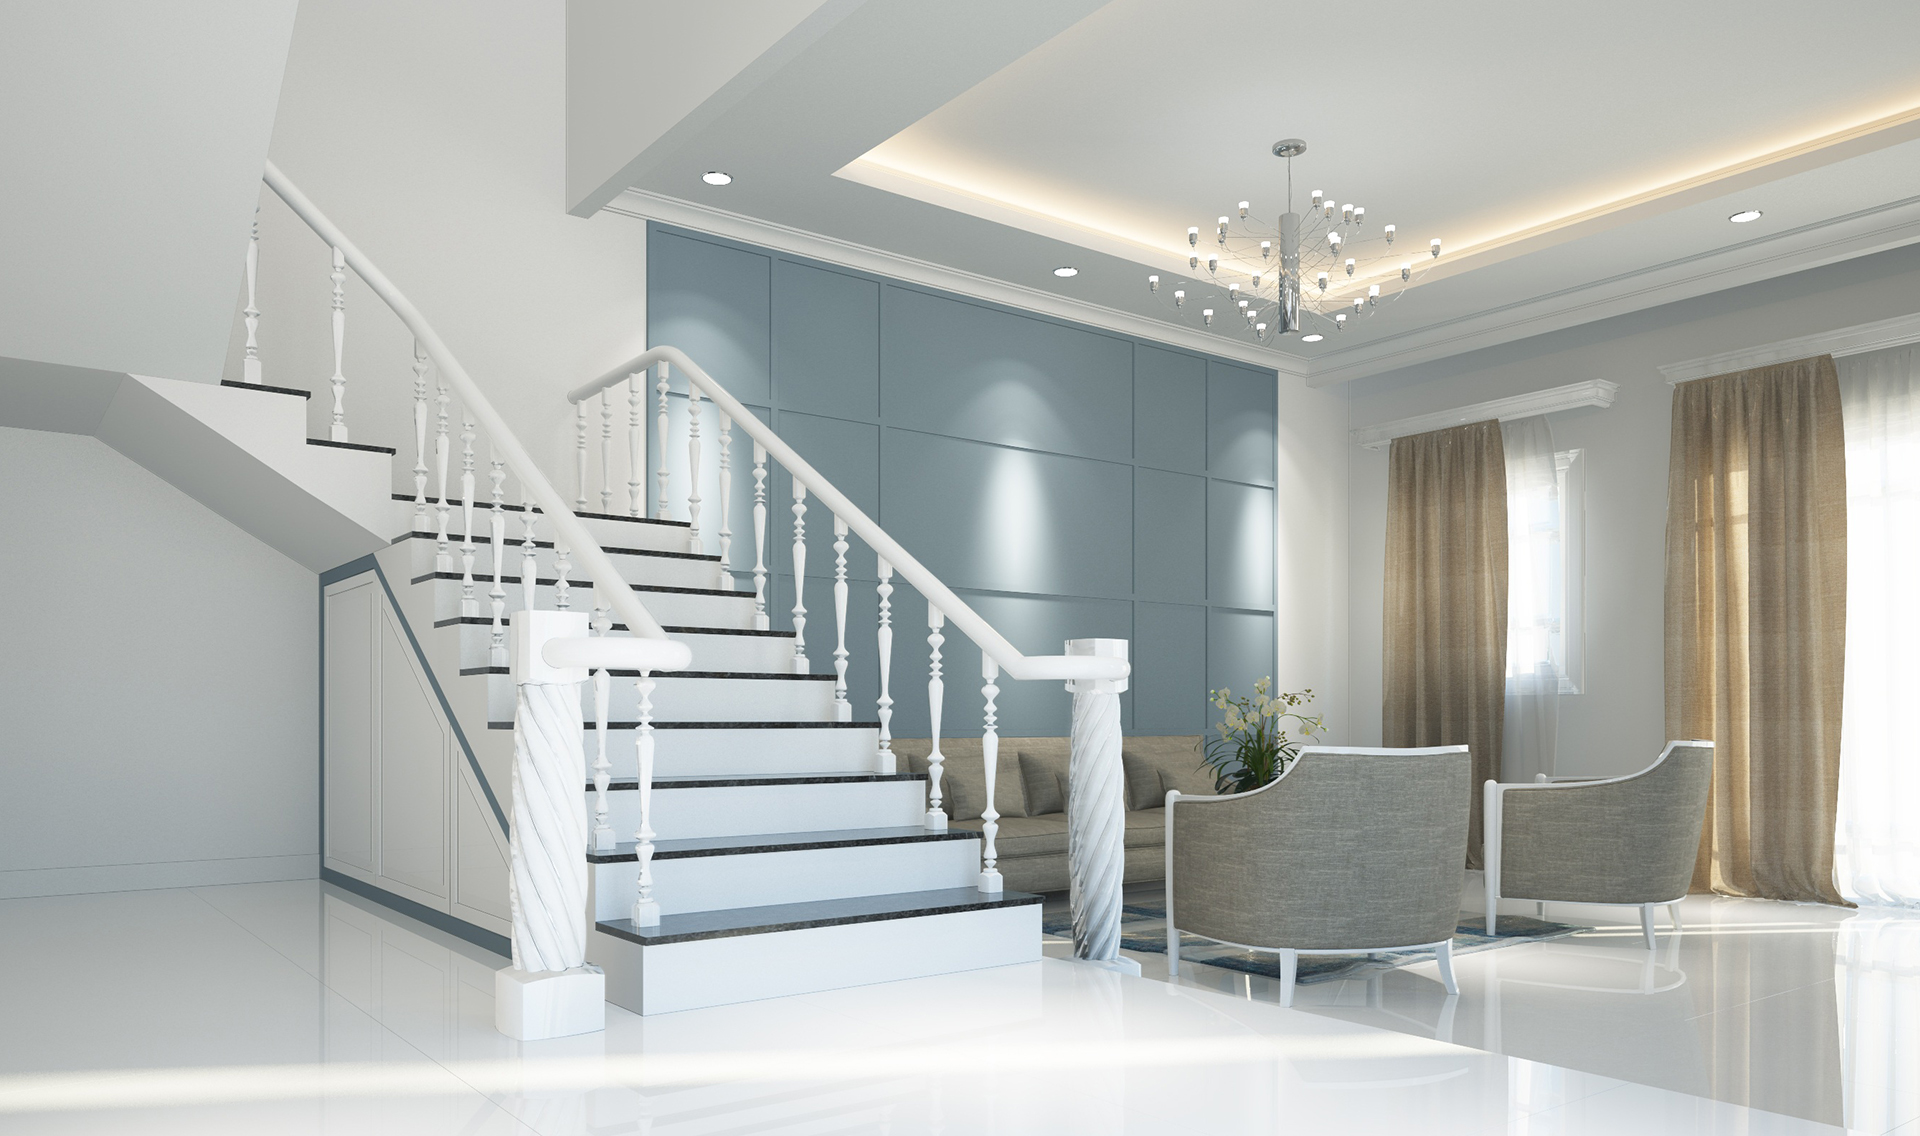 INT. STAIRCASE POSH – DAY